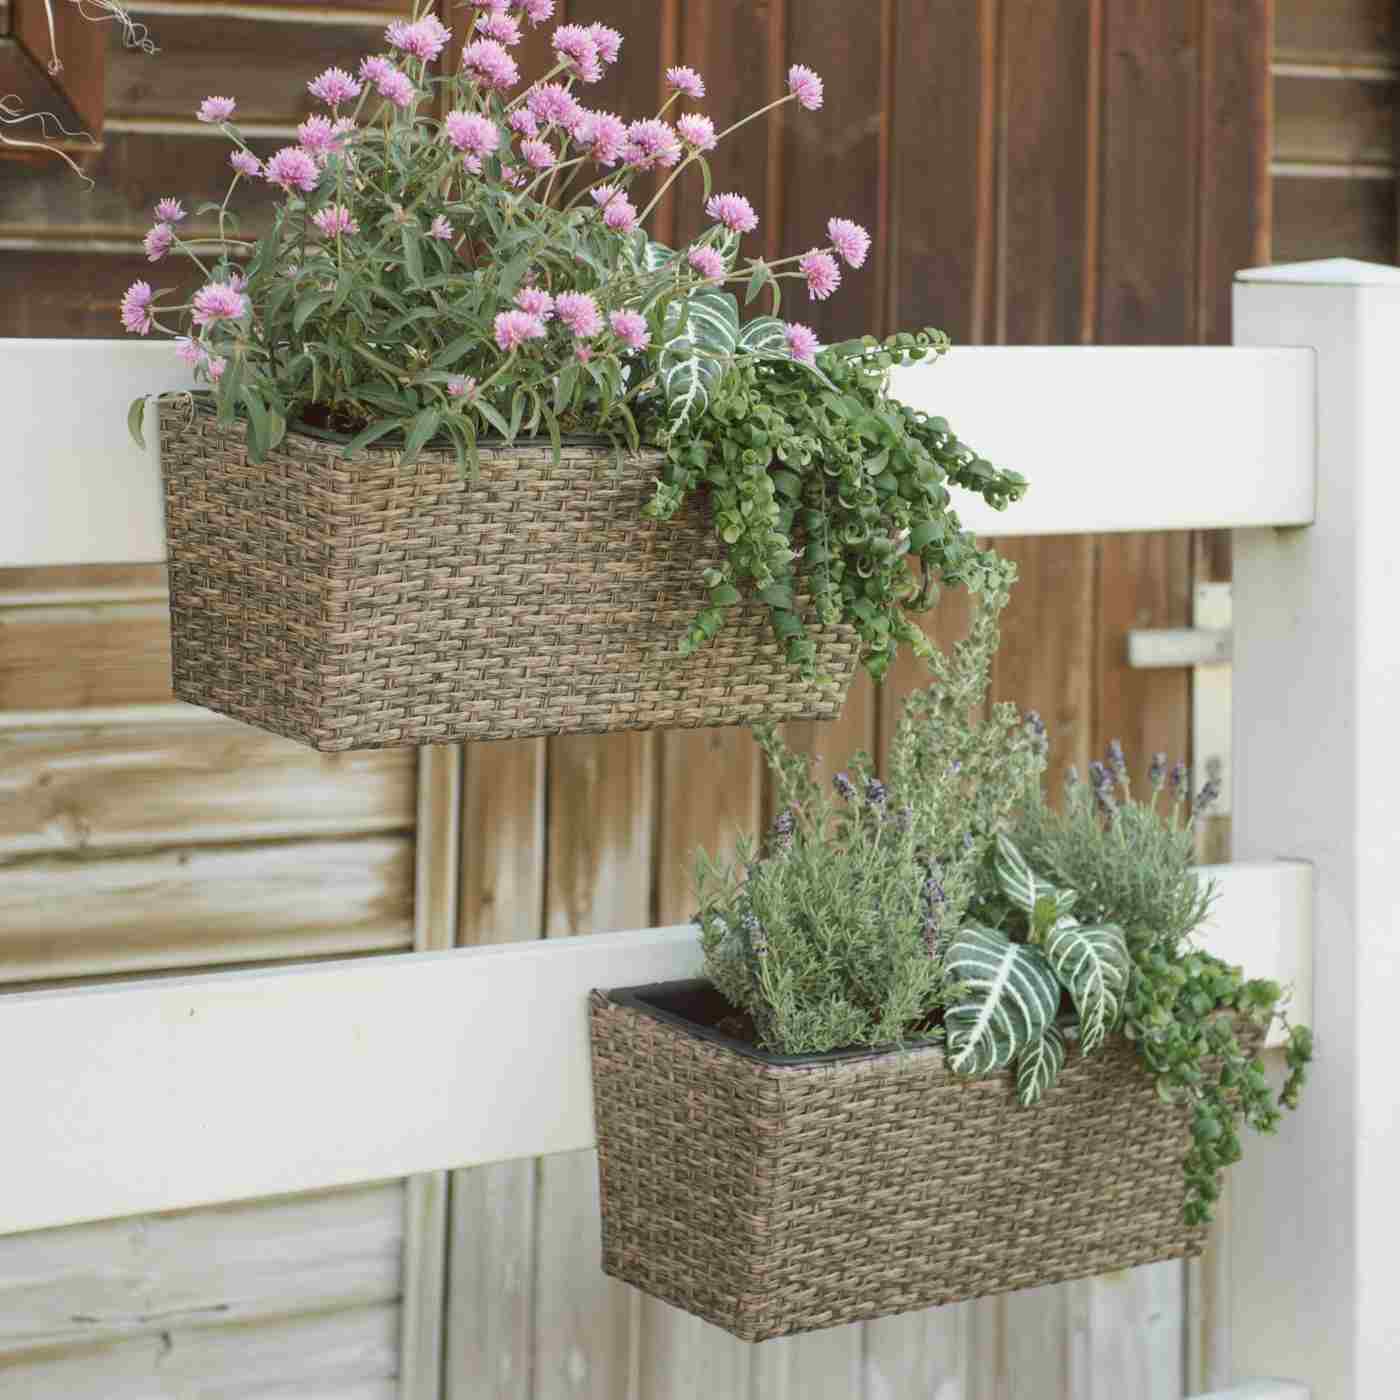 Balcony flanges for bees from crabs, sprouts and flowers together